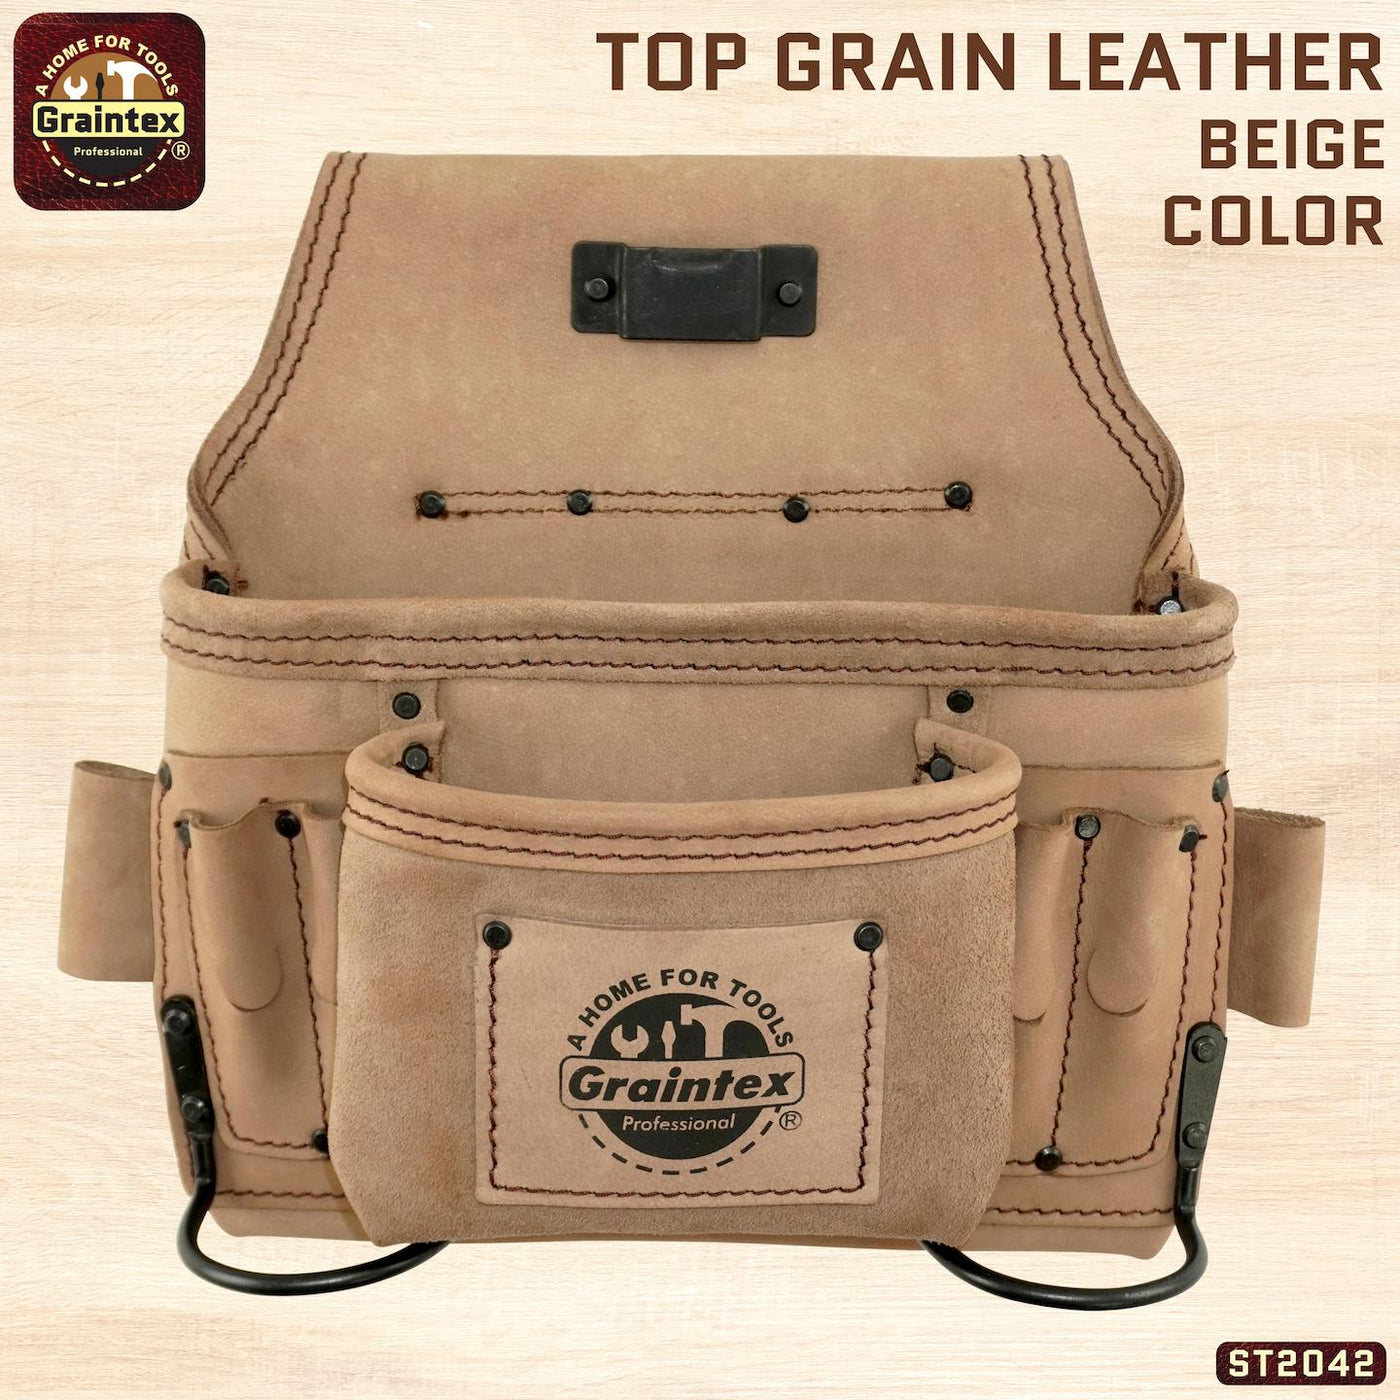 ST2042 :: 8 Pocket Nail & Tool Pouch Beige Color Top Grain Leather